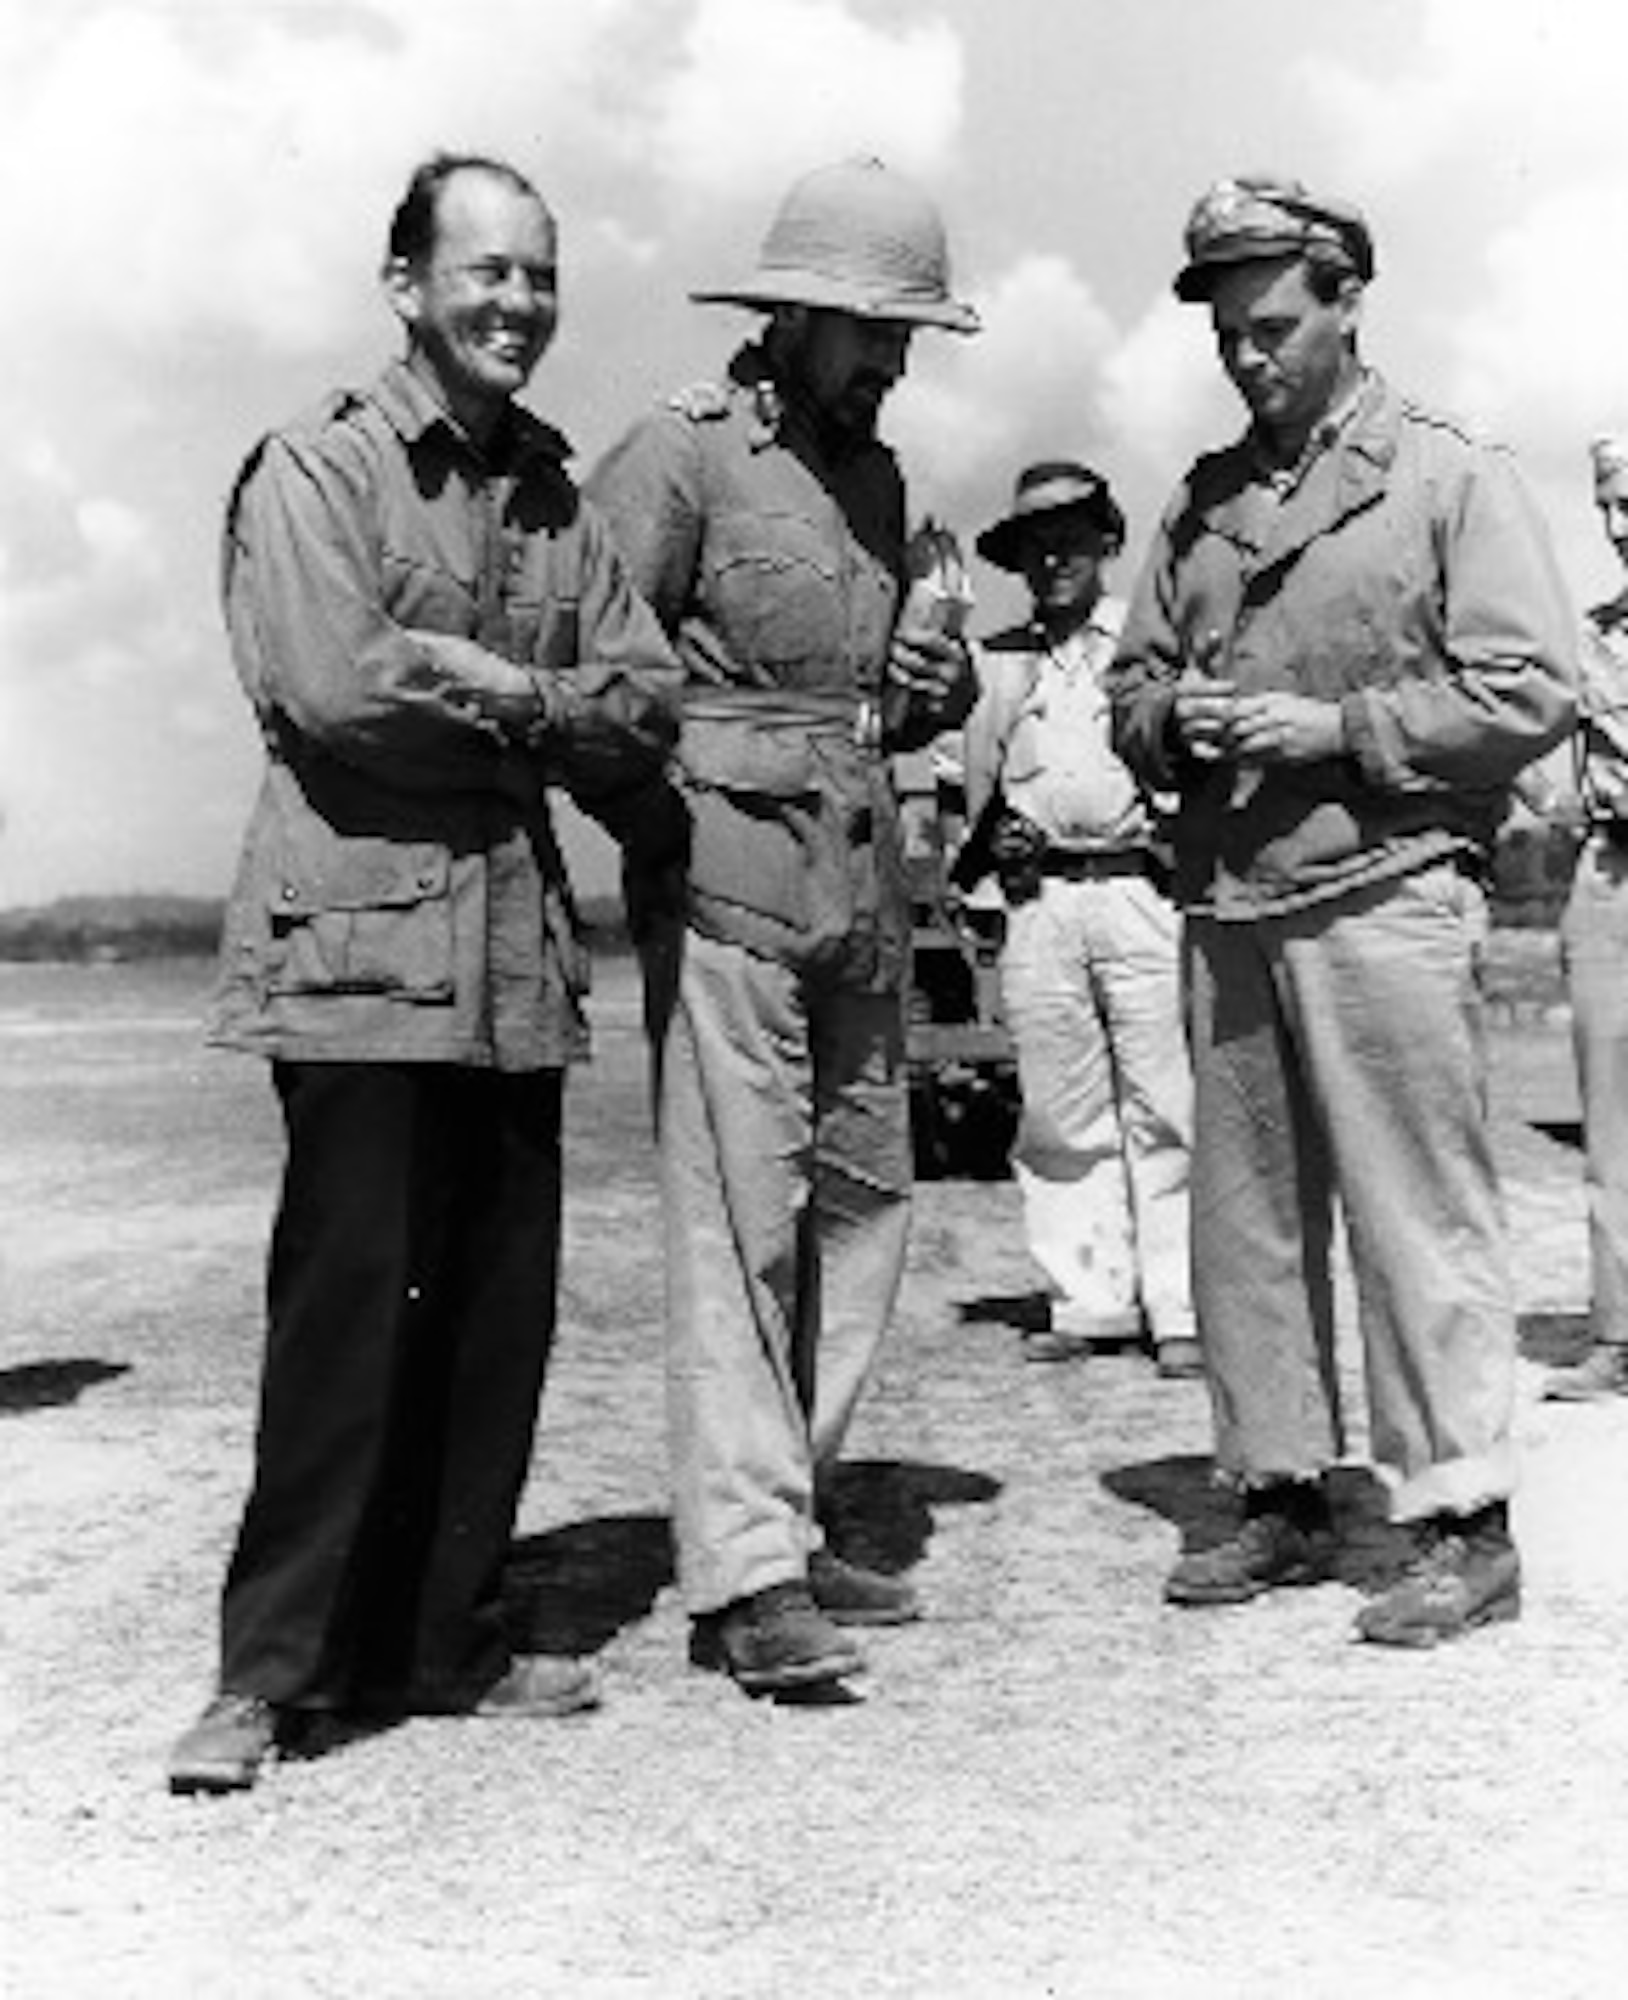 Colonels Allison and Cochran confer with British General Orde Wingate in India before Operation THURSDAY. Wingate’s concept of long-range penetration (LRP) proved to be successful when coupled with the capabilities of the 1 ACG. The ability to rapidly insert supplies, equipment, and fresh troops, as well as evacuate wounded was a major factor in the success of the Burma operations.